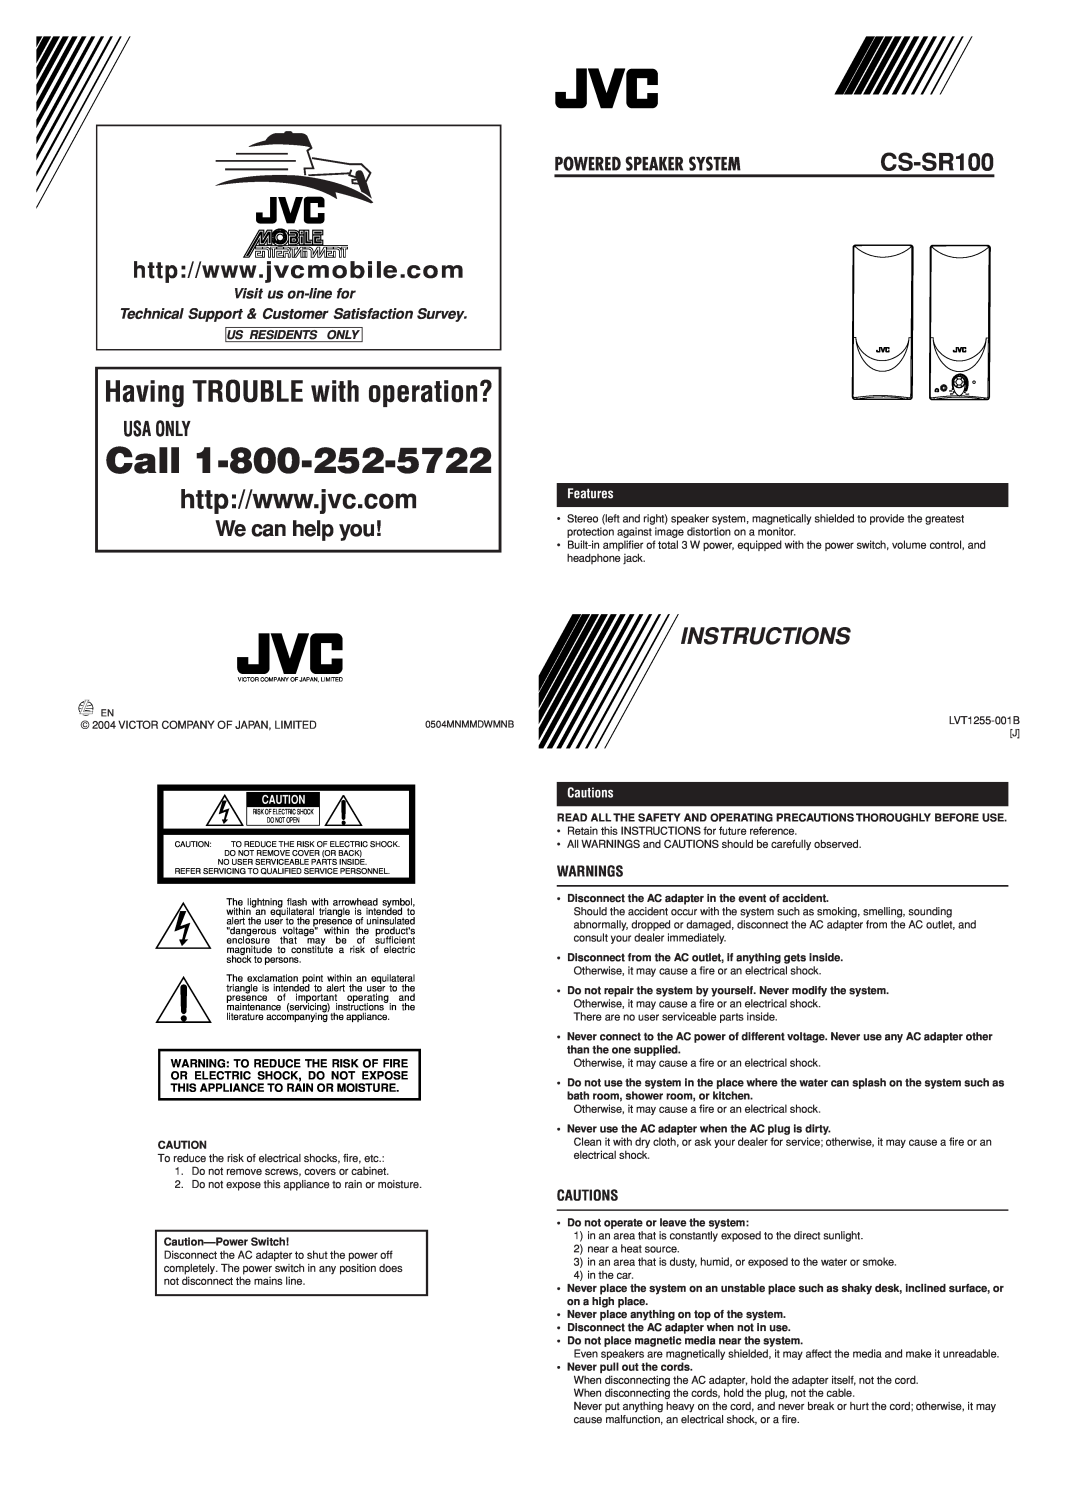 JVC CS-SR100 user service Features, Cautions, Call, Having TROUBLE with operation?, Instructions, We can help you 